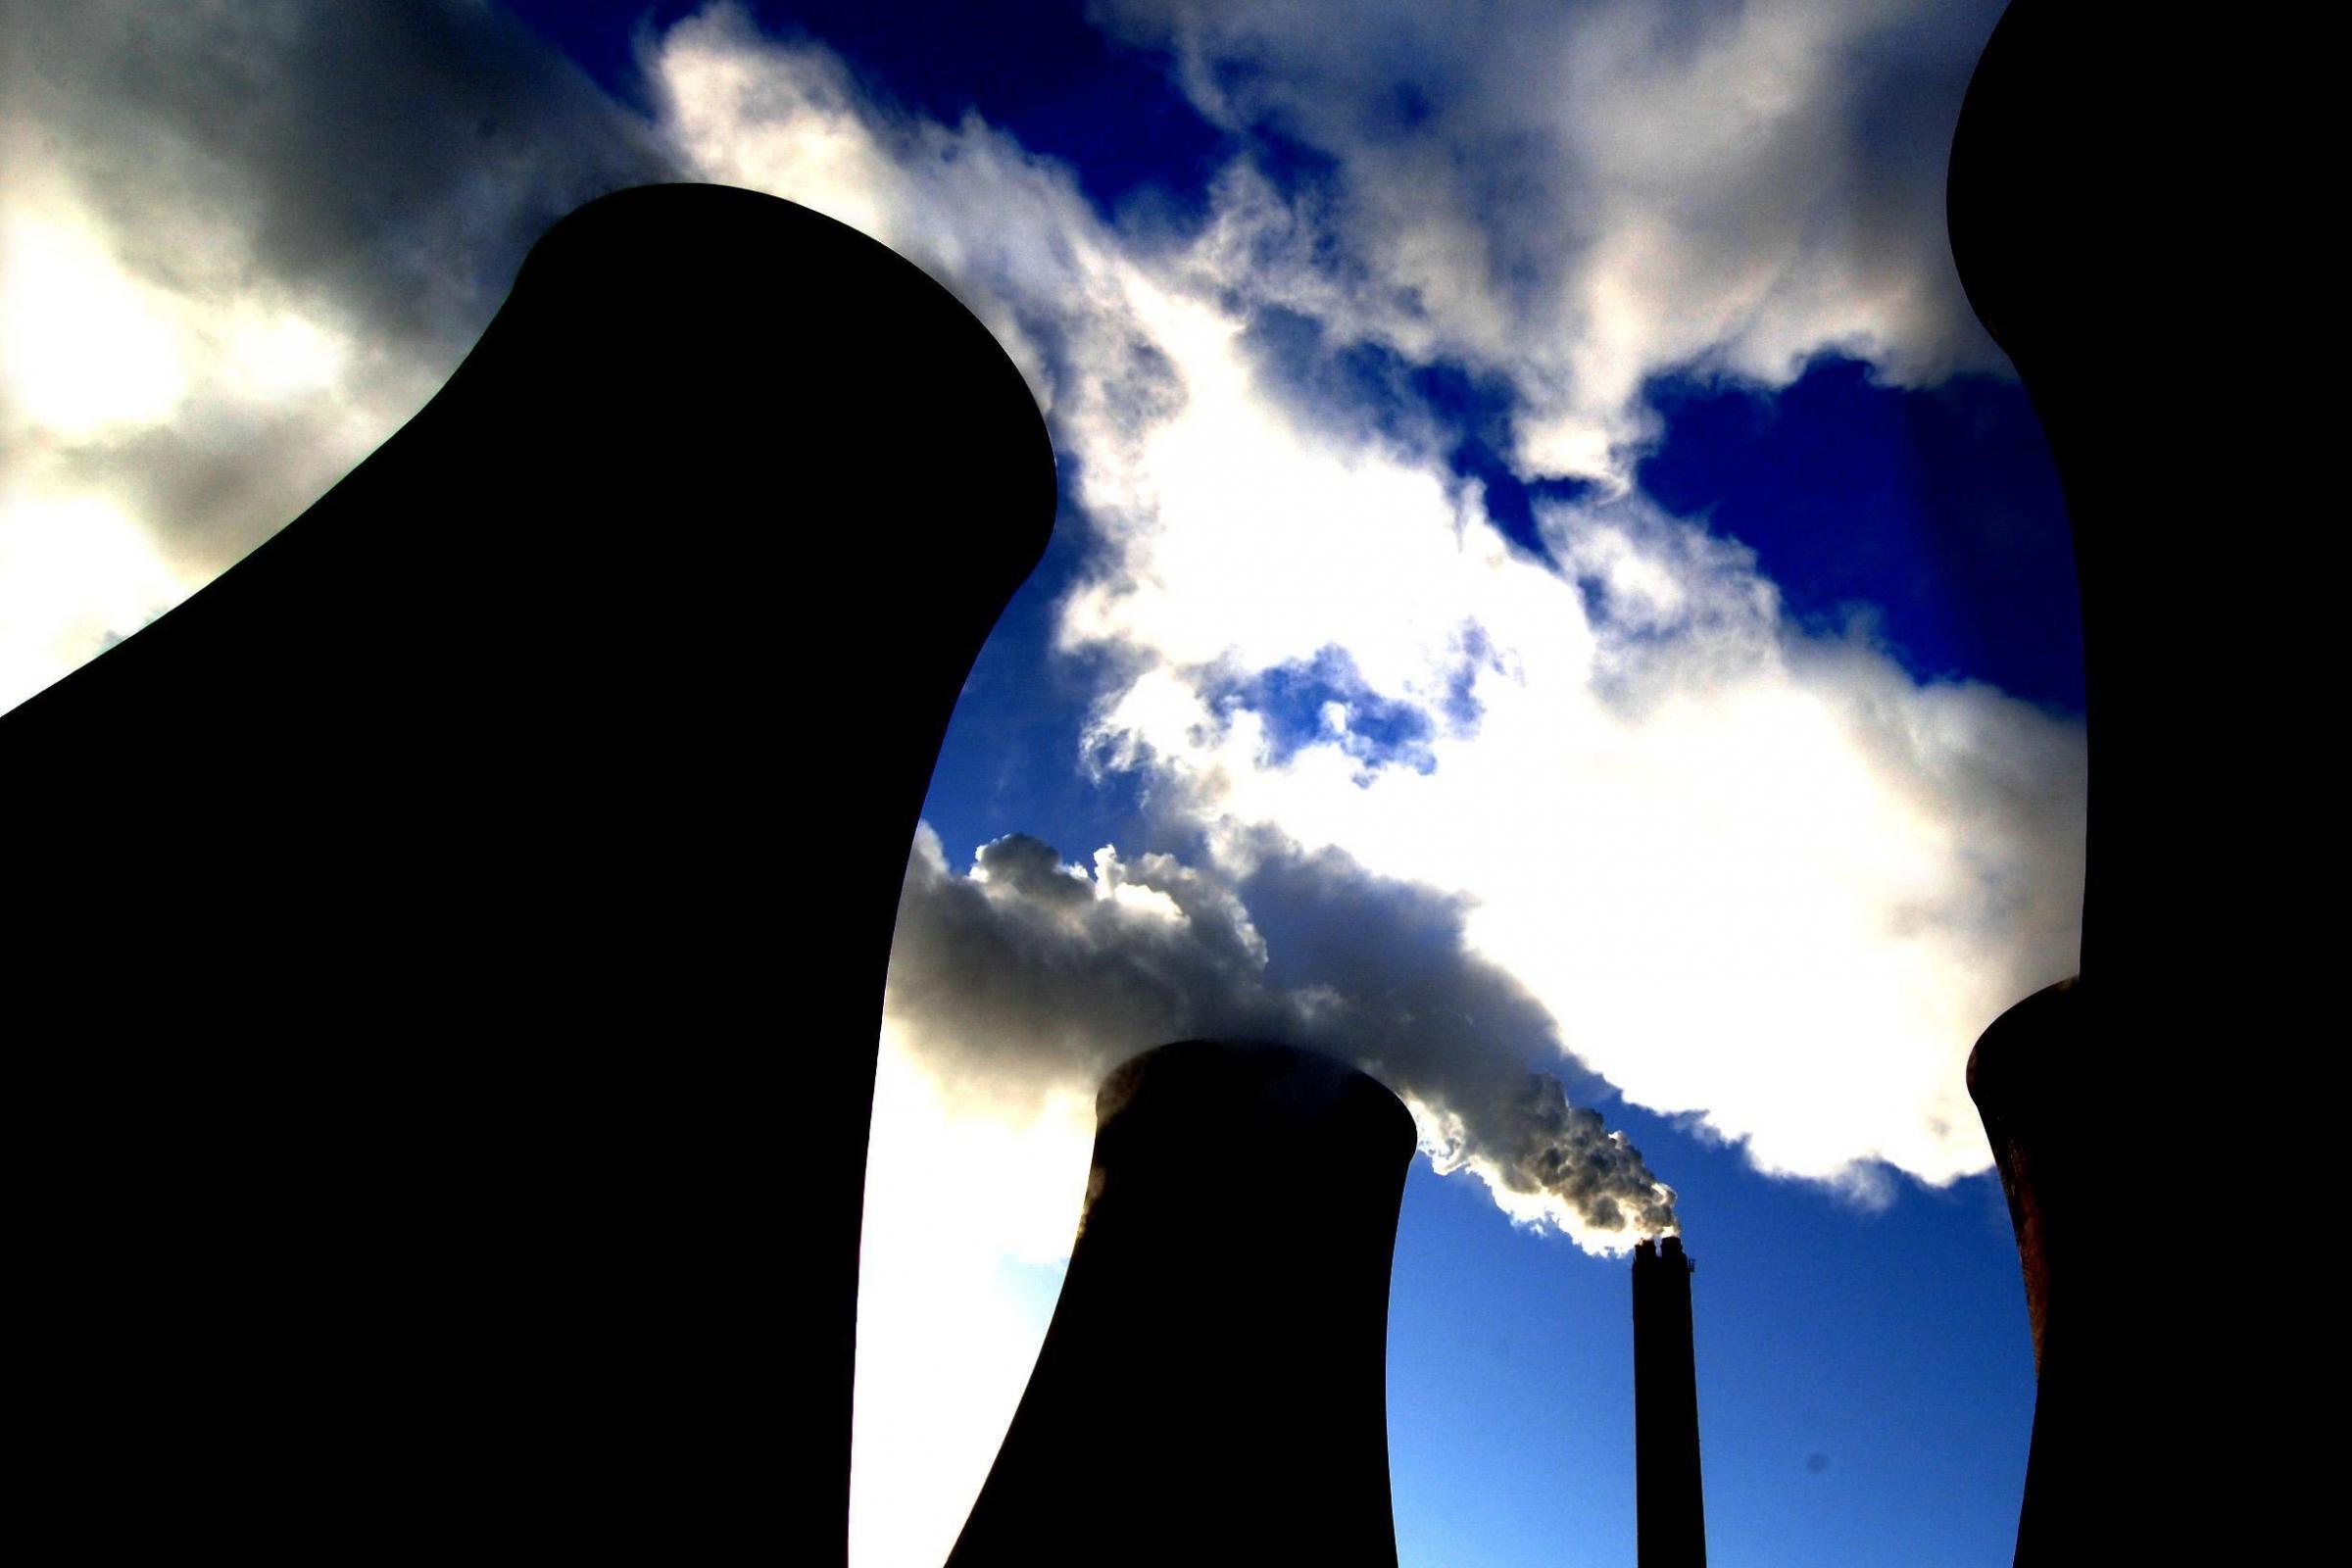 Power sector carbon emissions fall to lowest level since 1990 – analysis - Barrhead News